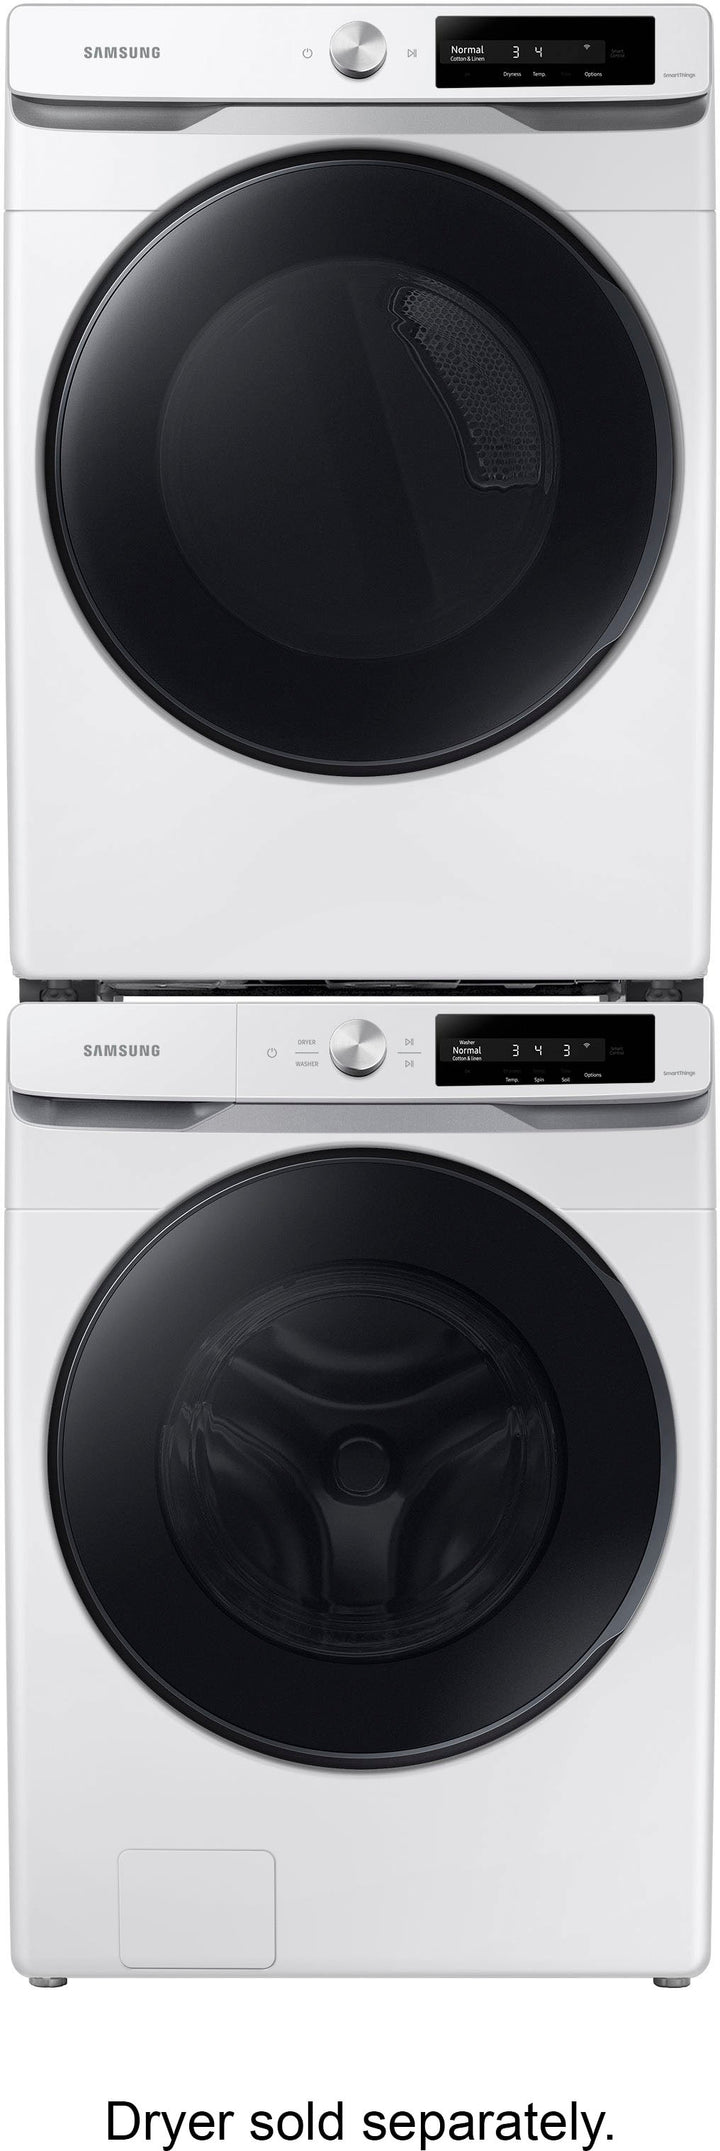 Samsung - 4.5 cu. ft. Large Capacity Smart Dial Front Load Washer with Super Speed Wash - White_24